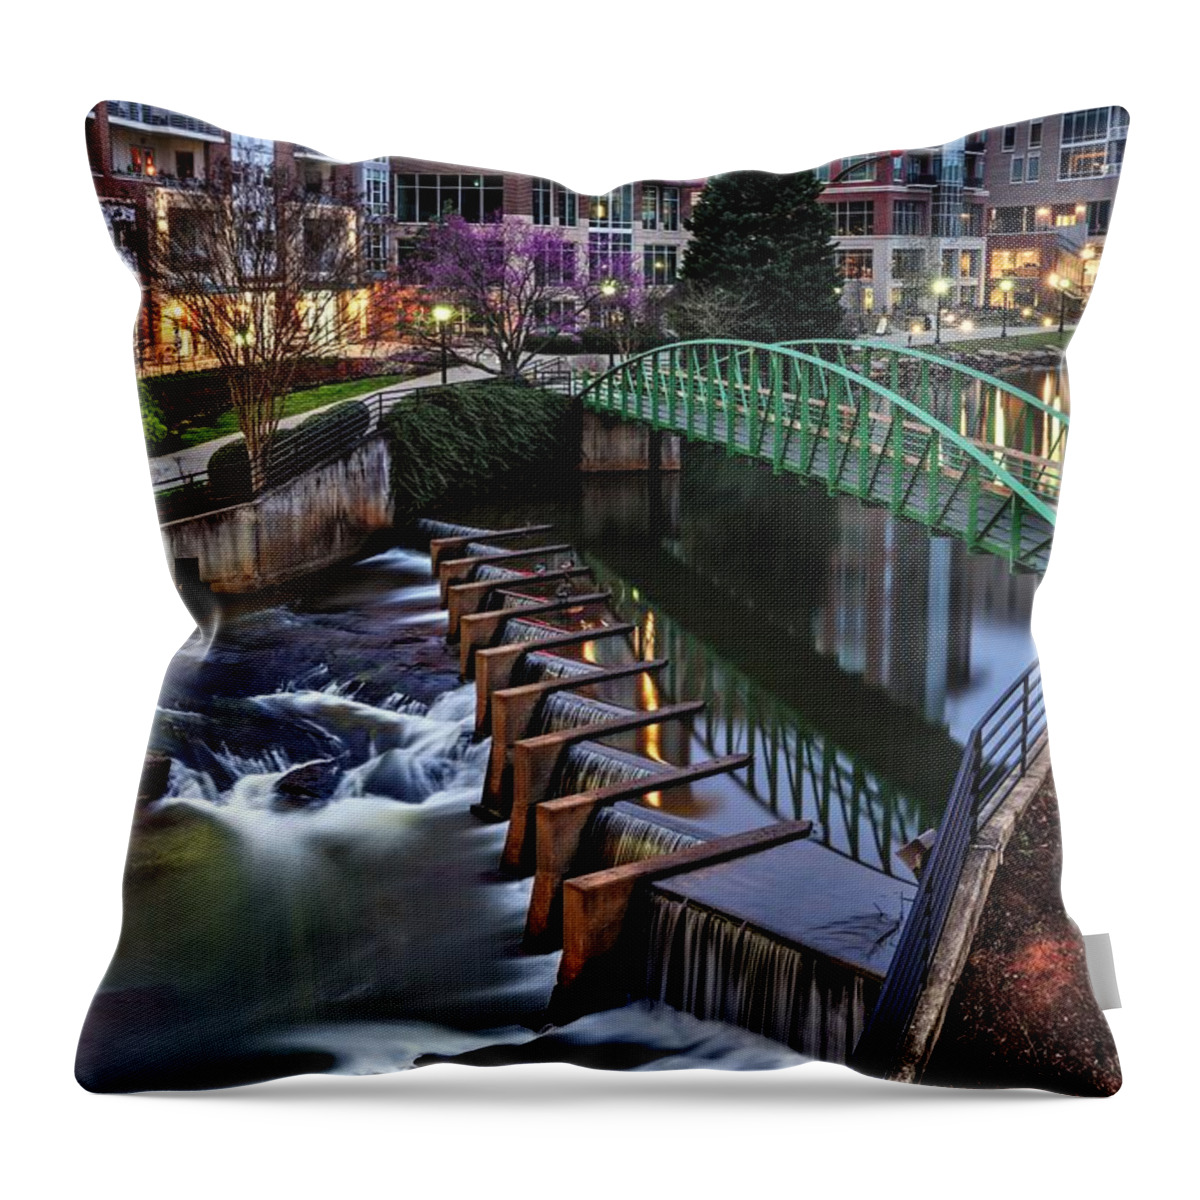 Downtown Greenville Throw Pillow featuring the photograph Reedy River Greenville South Carolina Before Sunrise by Carol Montoya